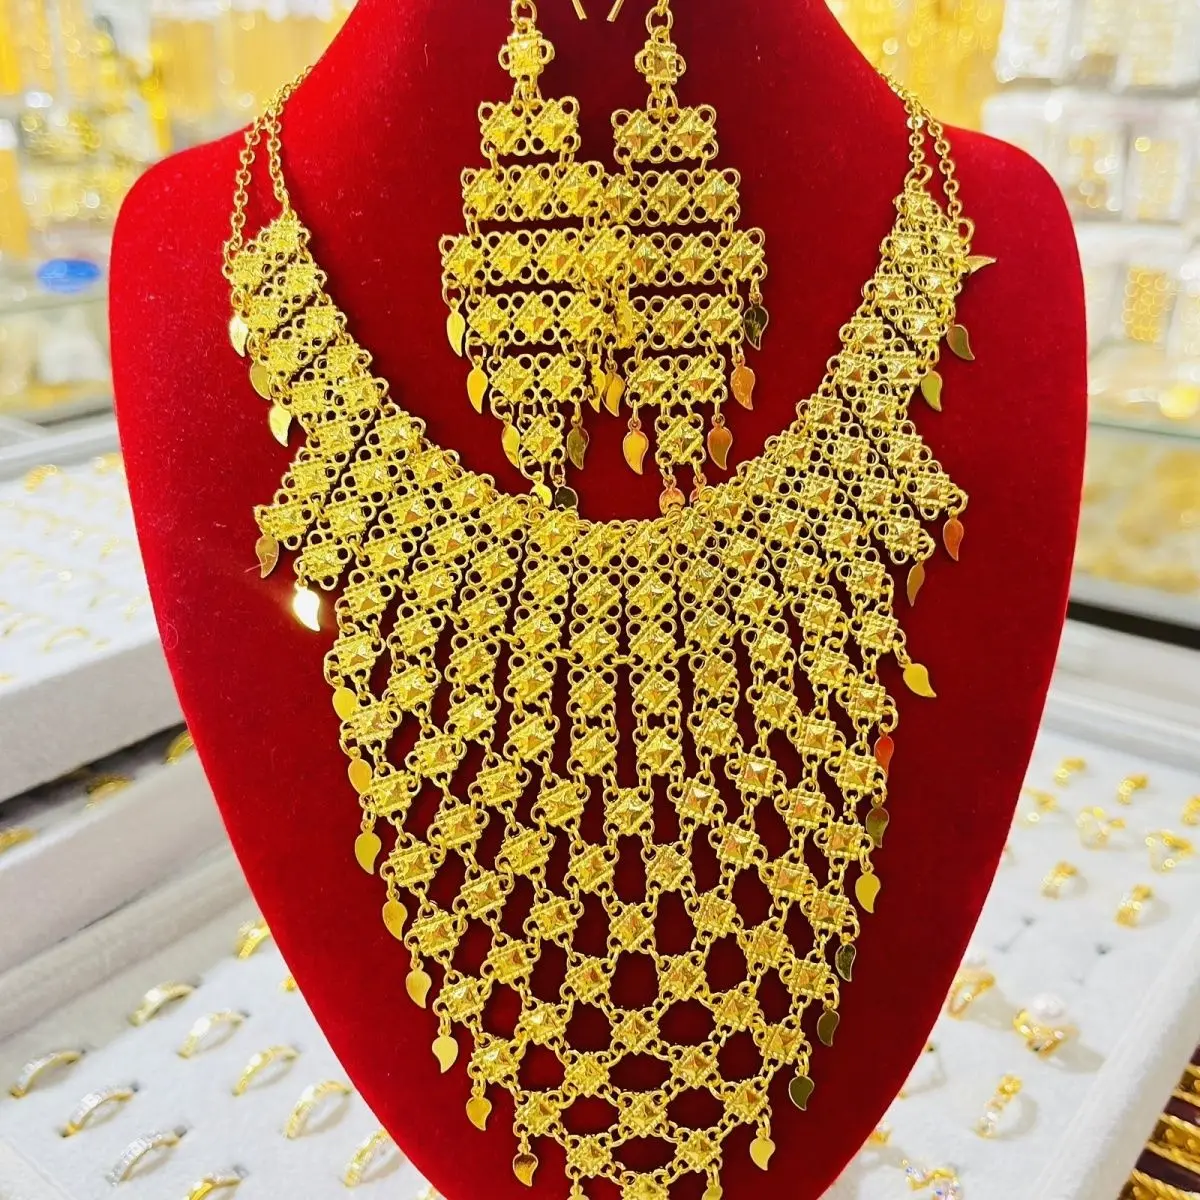 Popodion New Dubai Jewelry Set Women's Necklace Earrings Ring Bridal Wedding Accessories YY10093